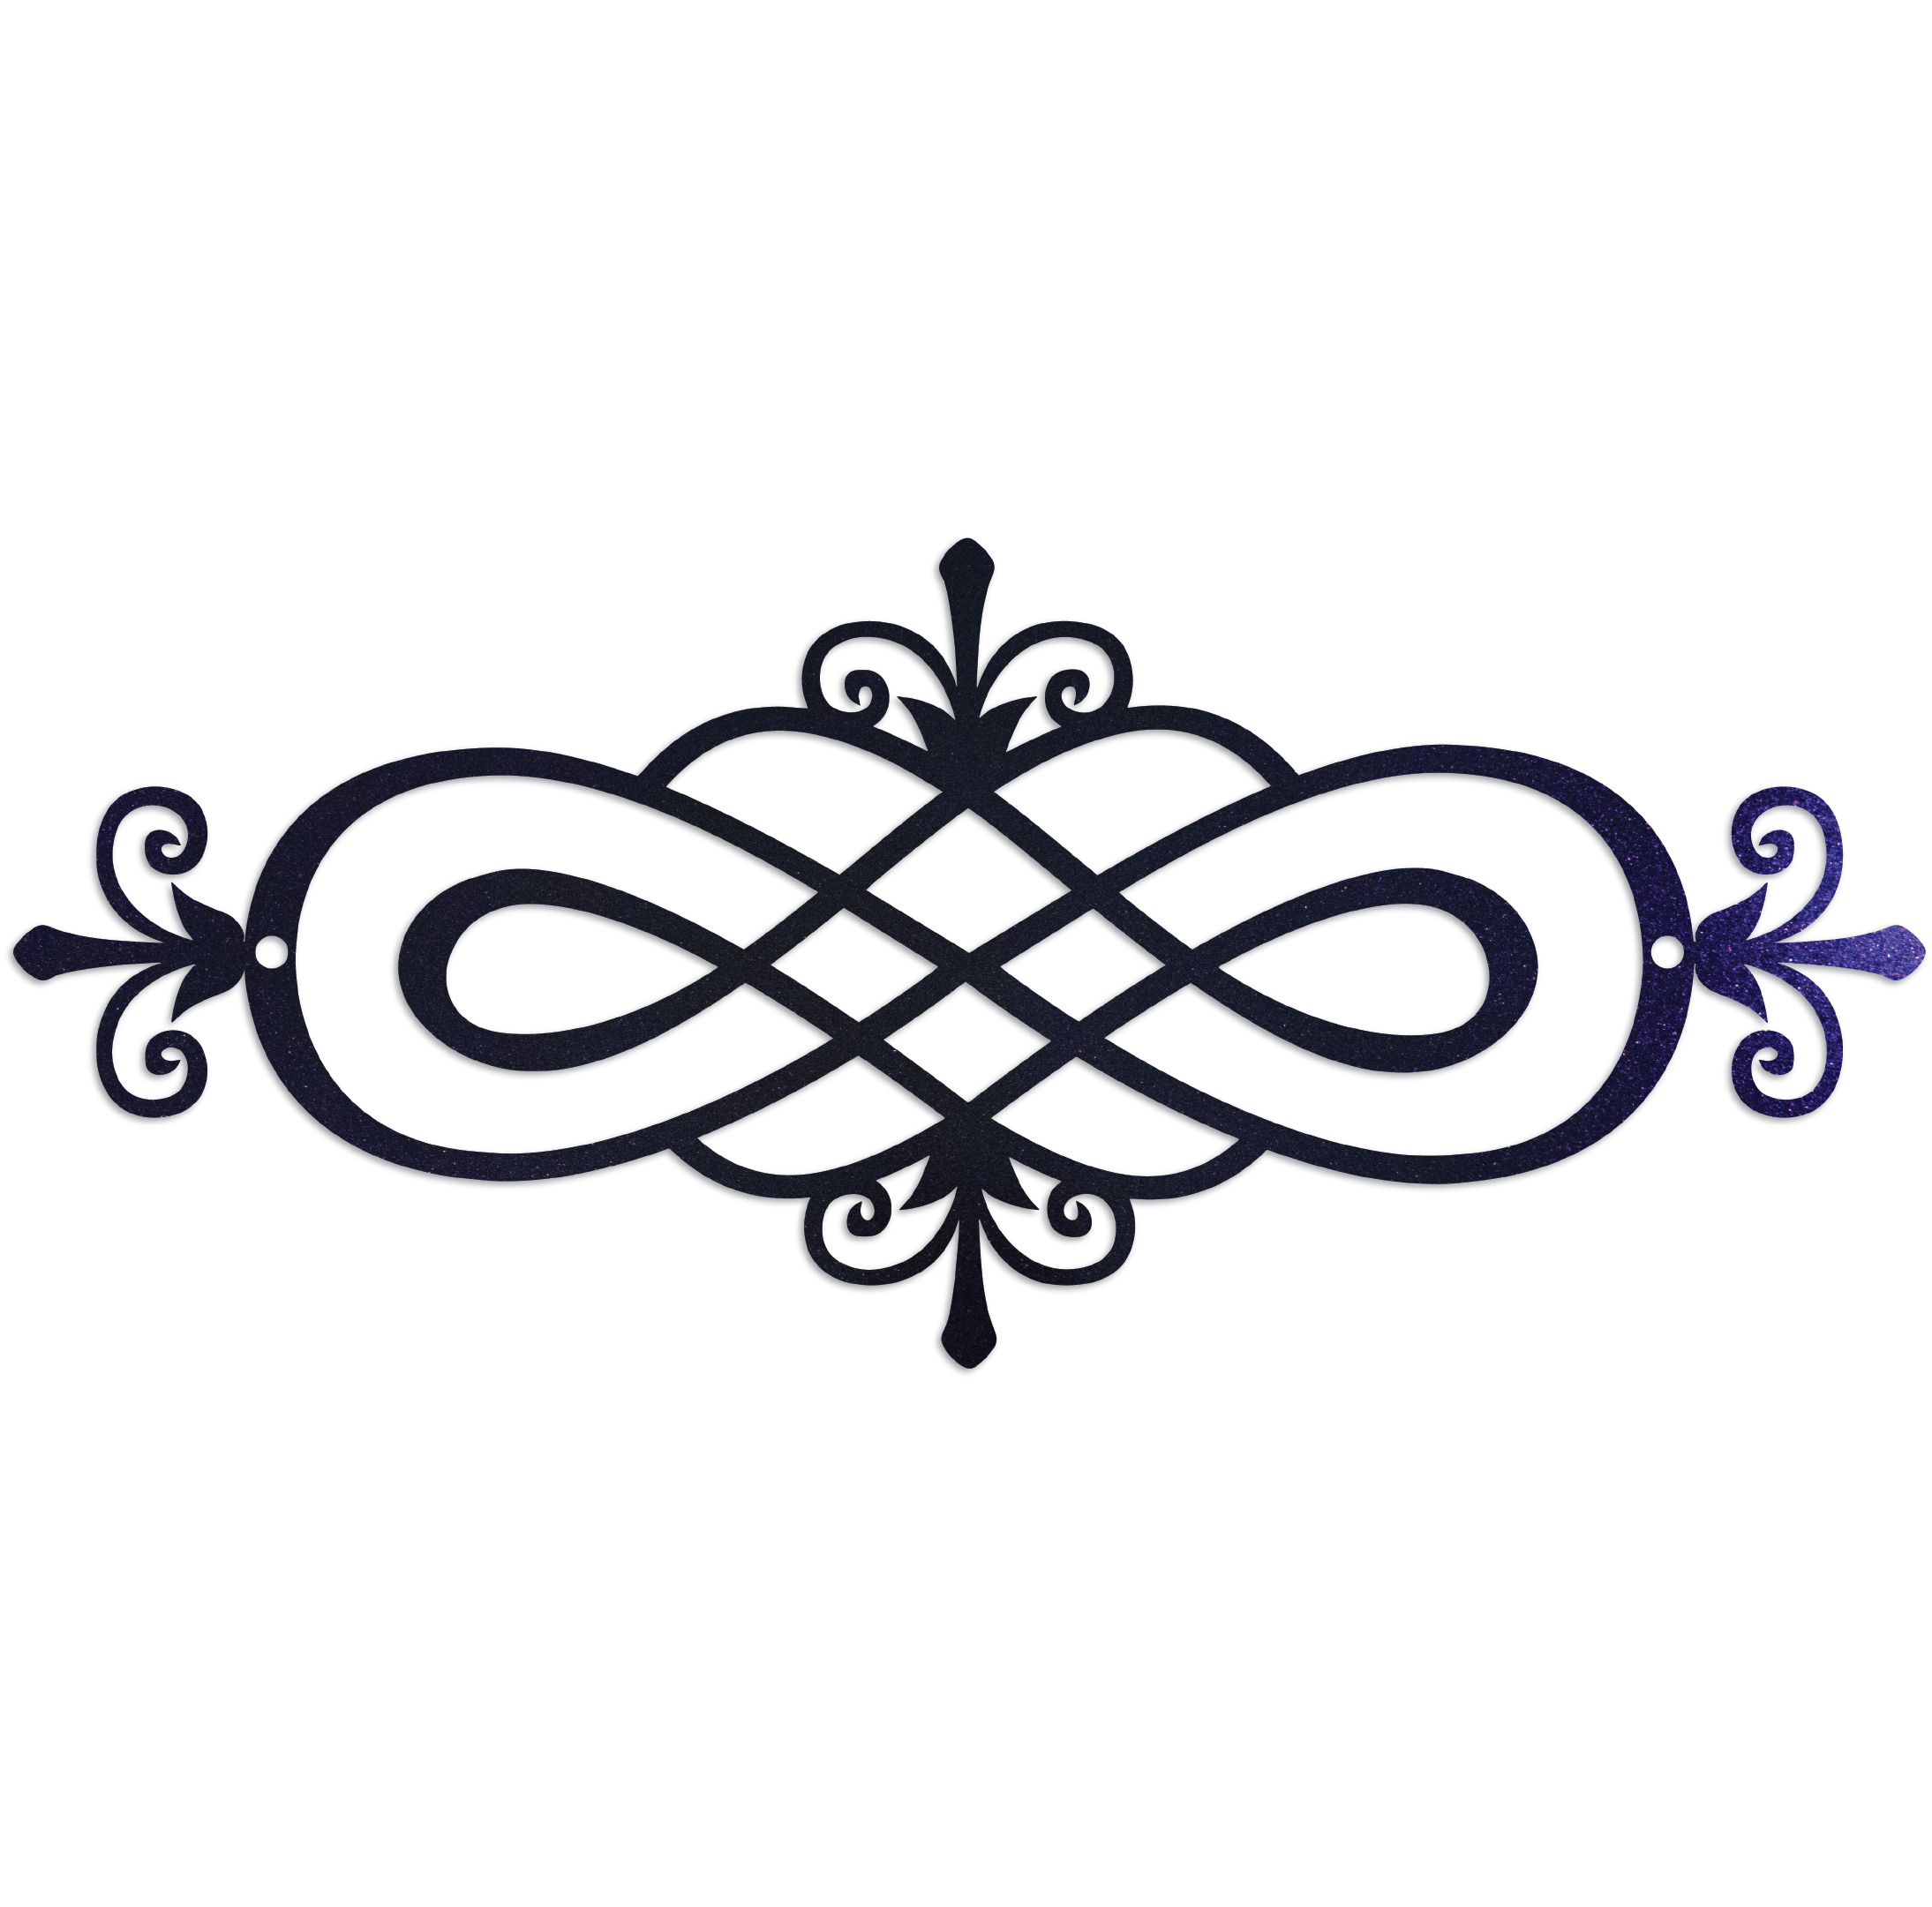 Ornate Infinity Sign